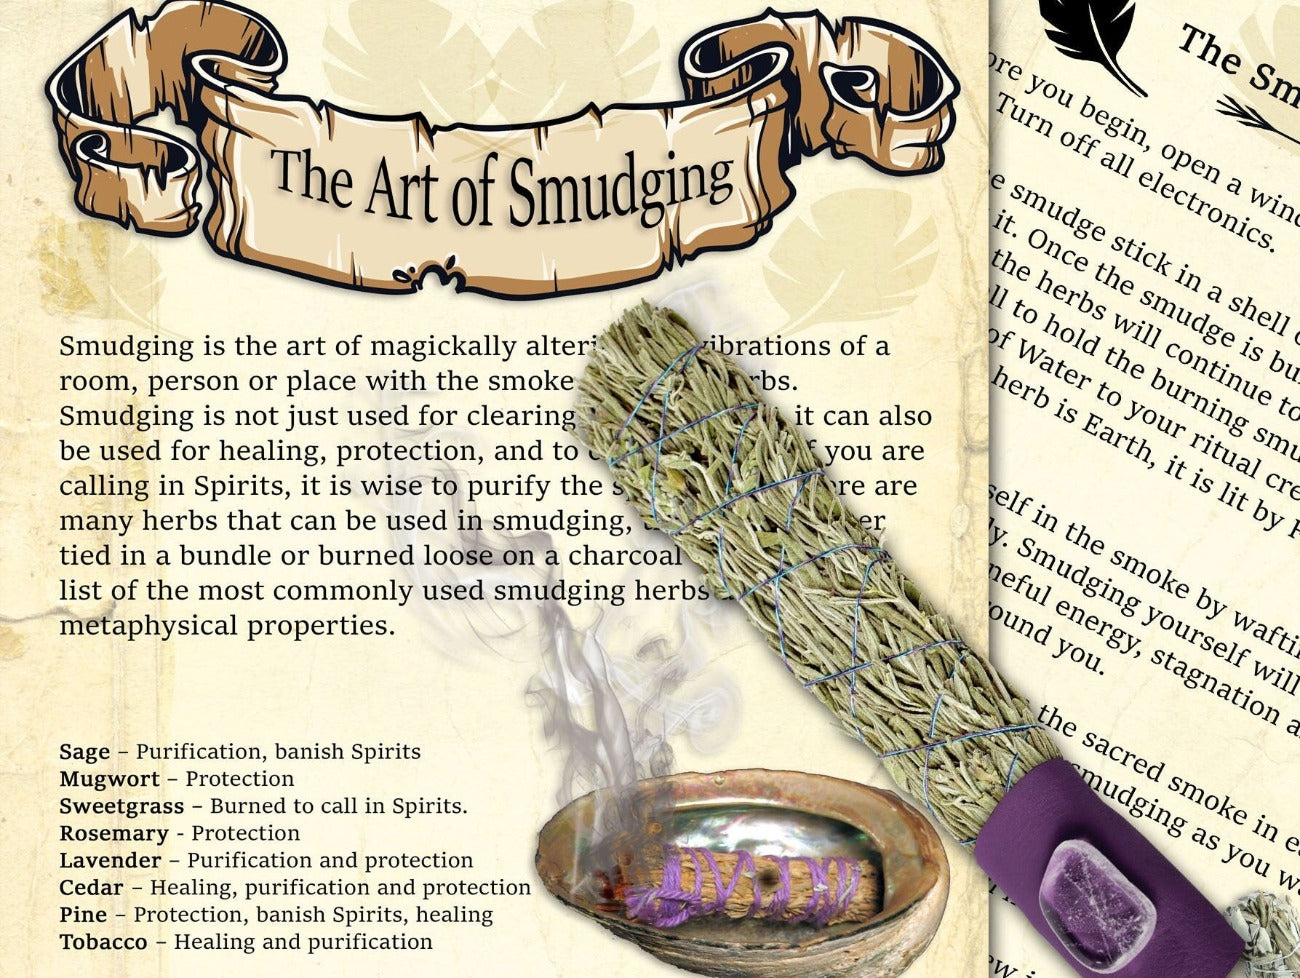 ART of SMUDGING, Guide to Herbs, Incense White Sage Palo Santo, Ceremony Prayers, How to Cleanse Ritual, DIY Bundles, Sage Stick, 2 Pages - Morgana Magick Spell